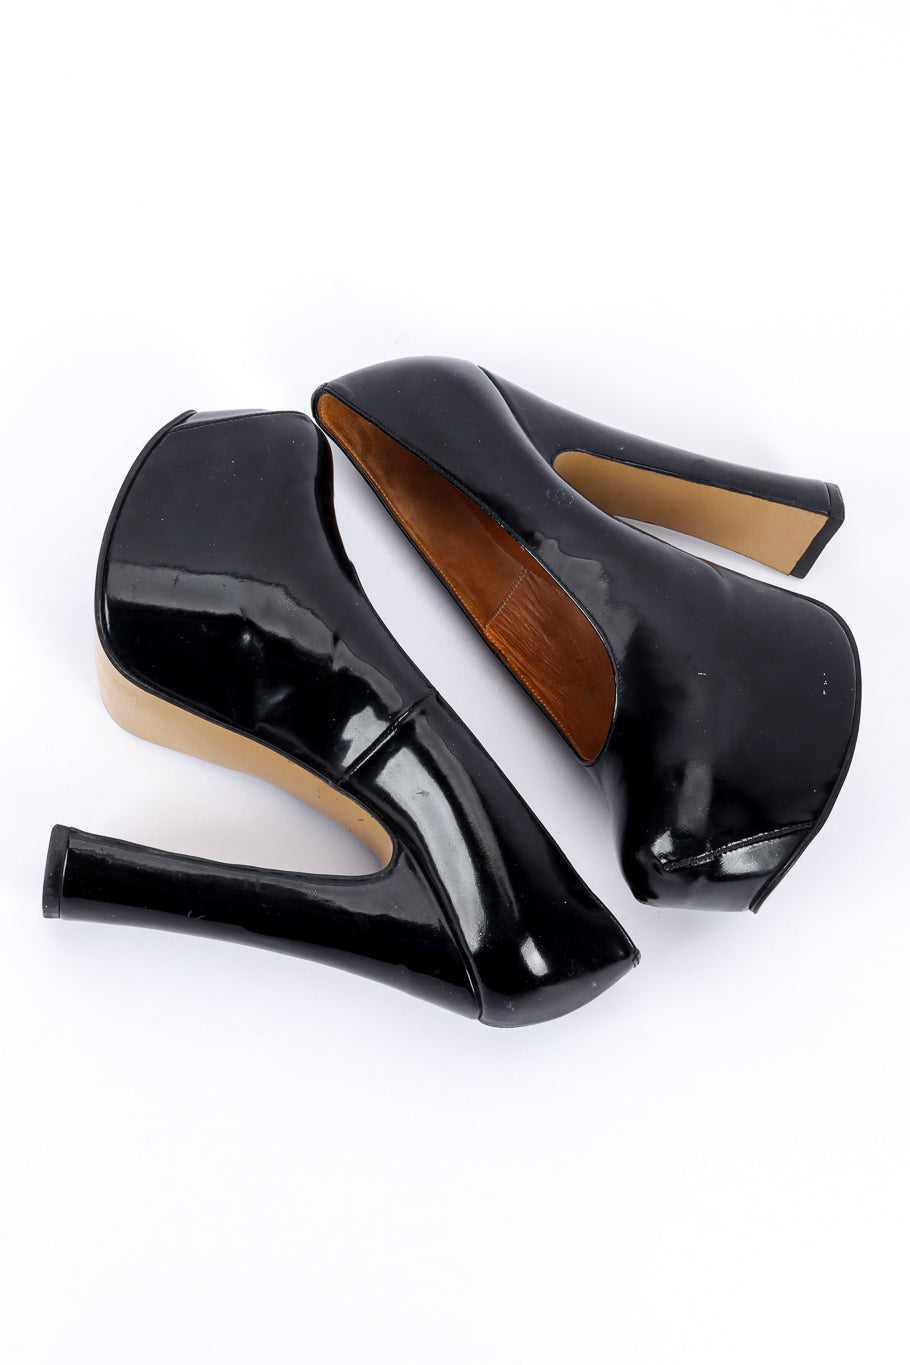 Vintage Vivienne Westwood 1993 F/W Patent Leather Elevated Court Shoe top view of sides @recessla